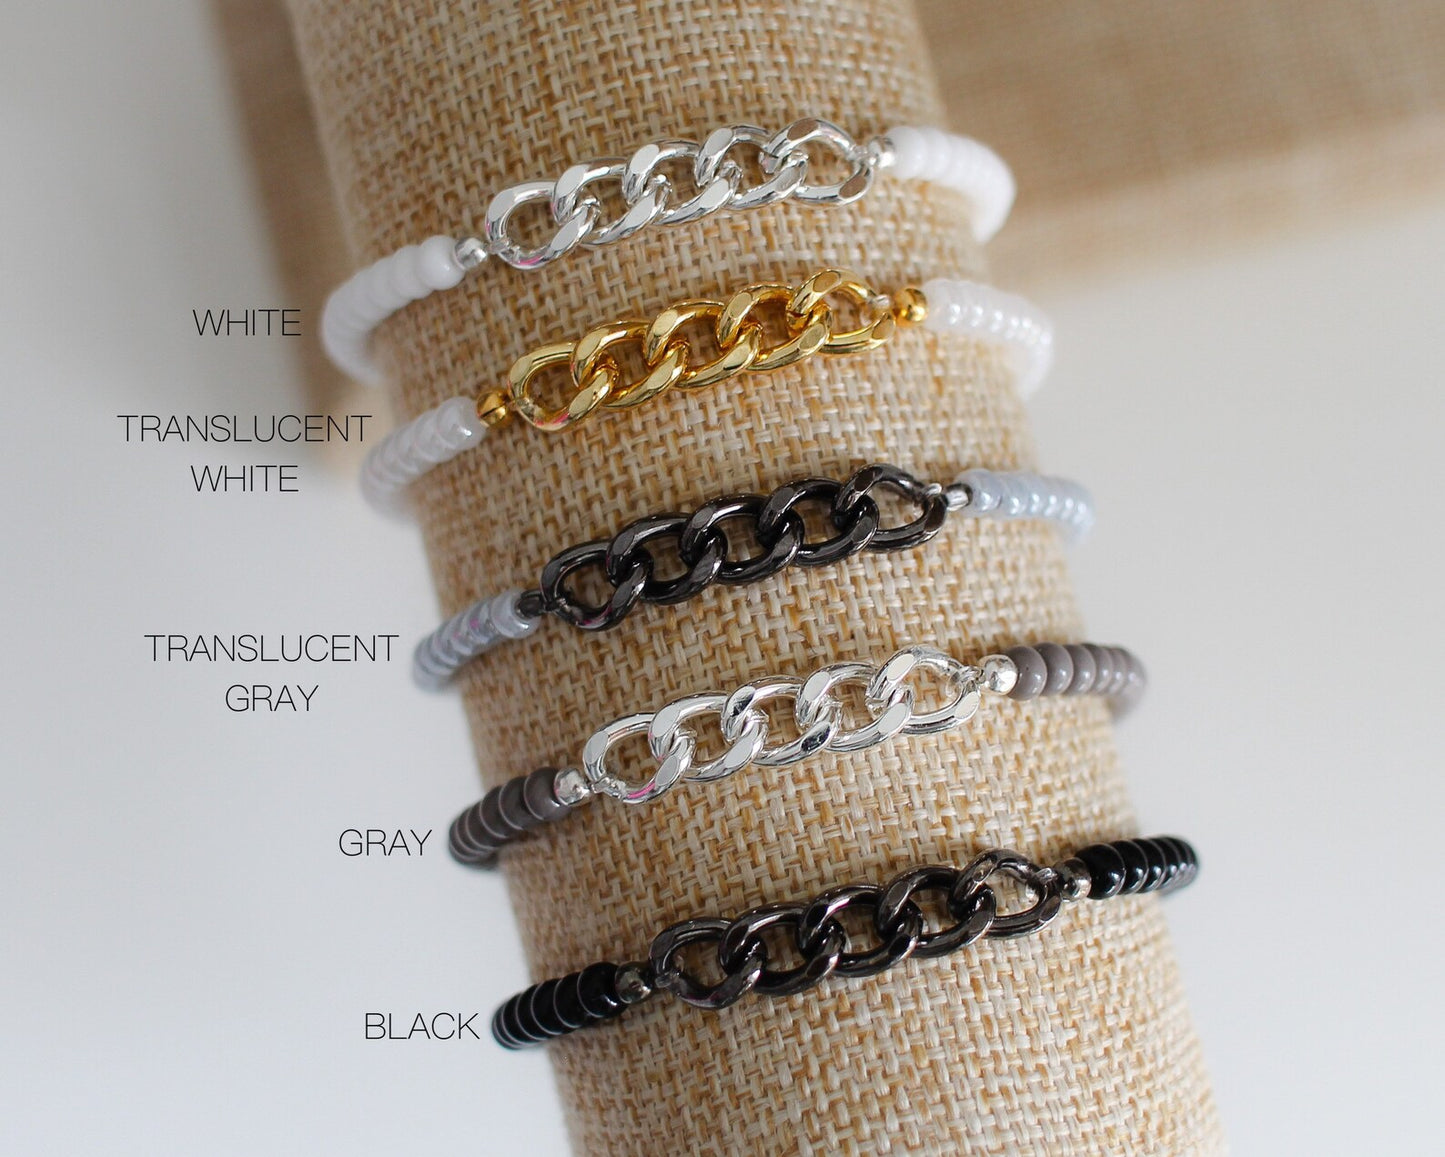 Chain And Beads Bracelets